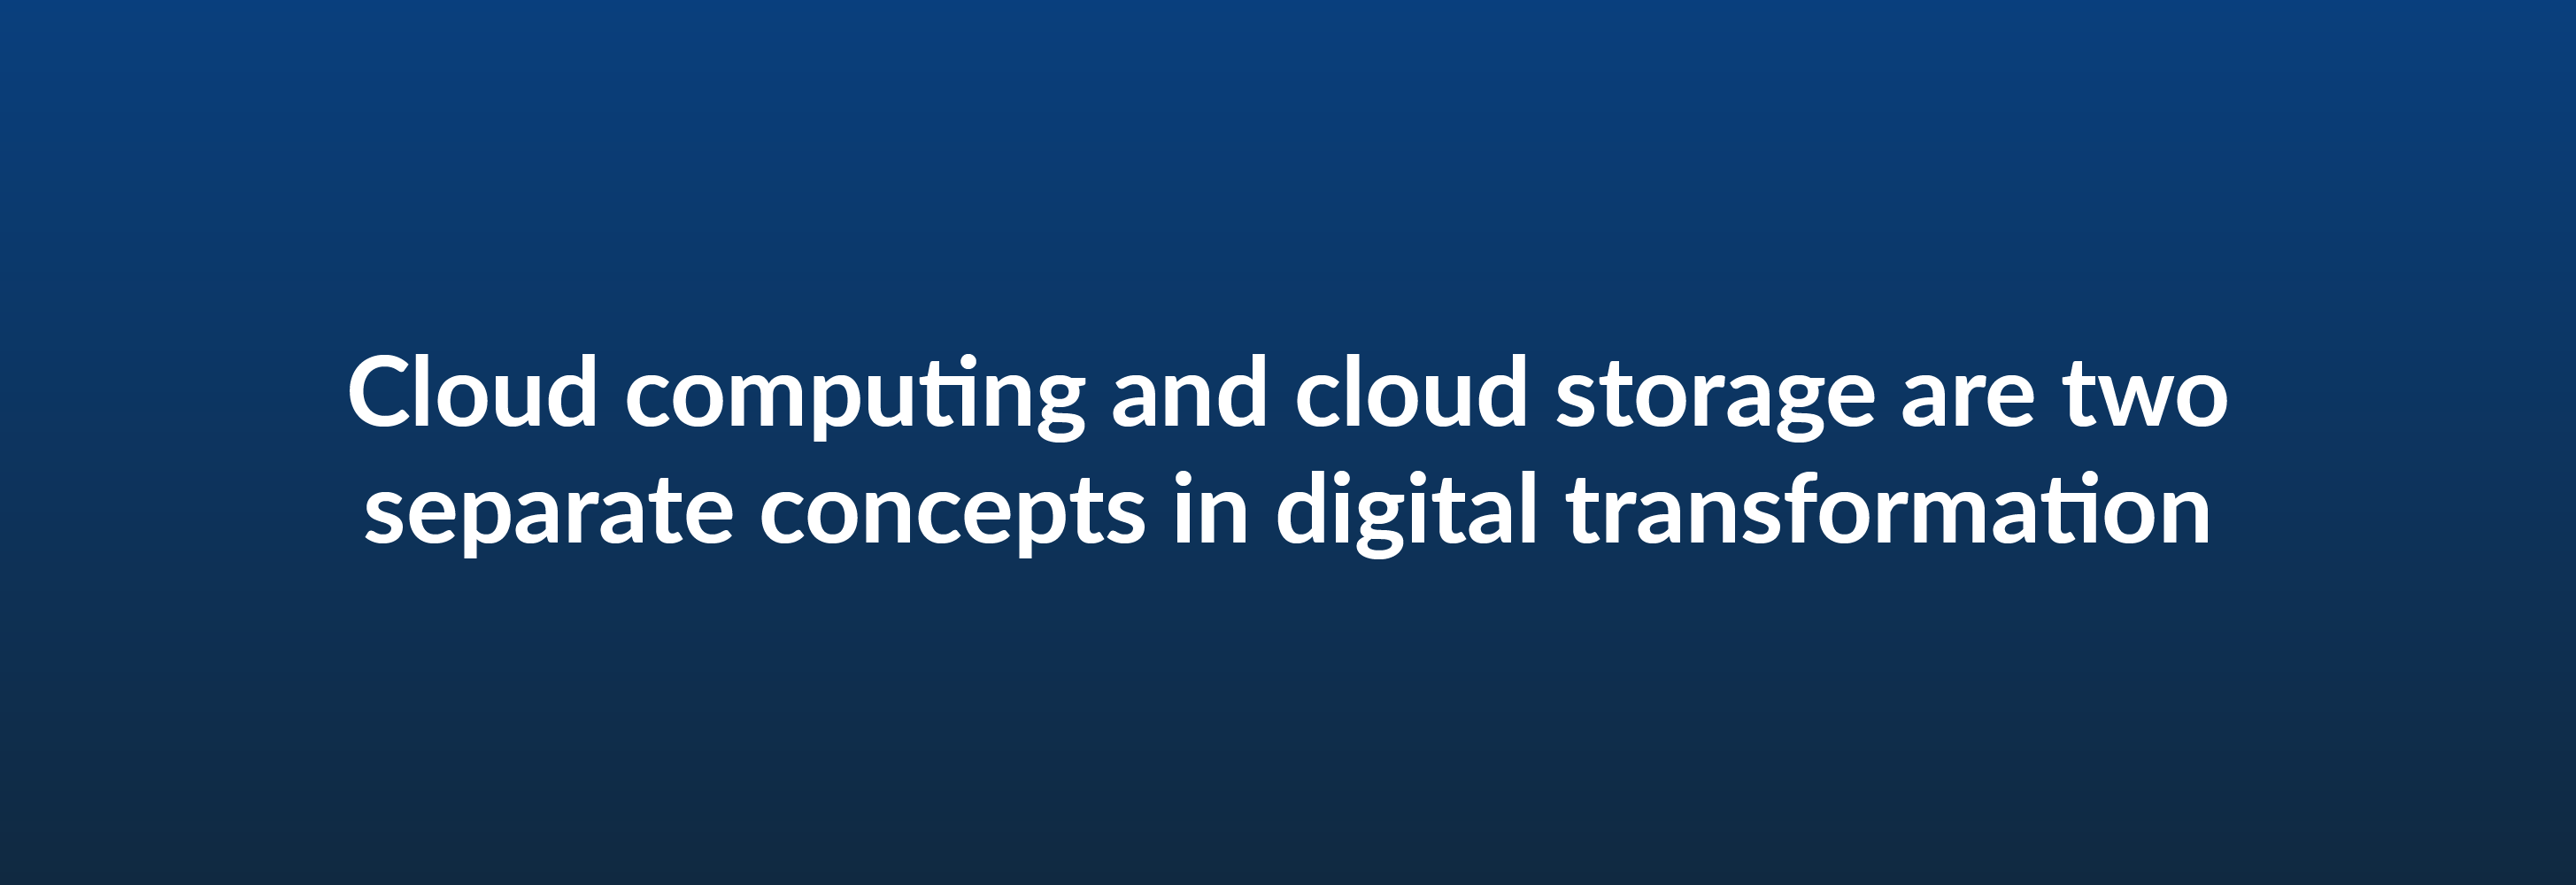 Cloud computing and cloud storage are two separate in digital transformation